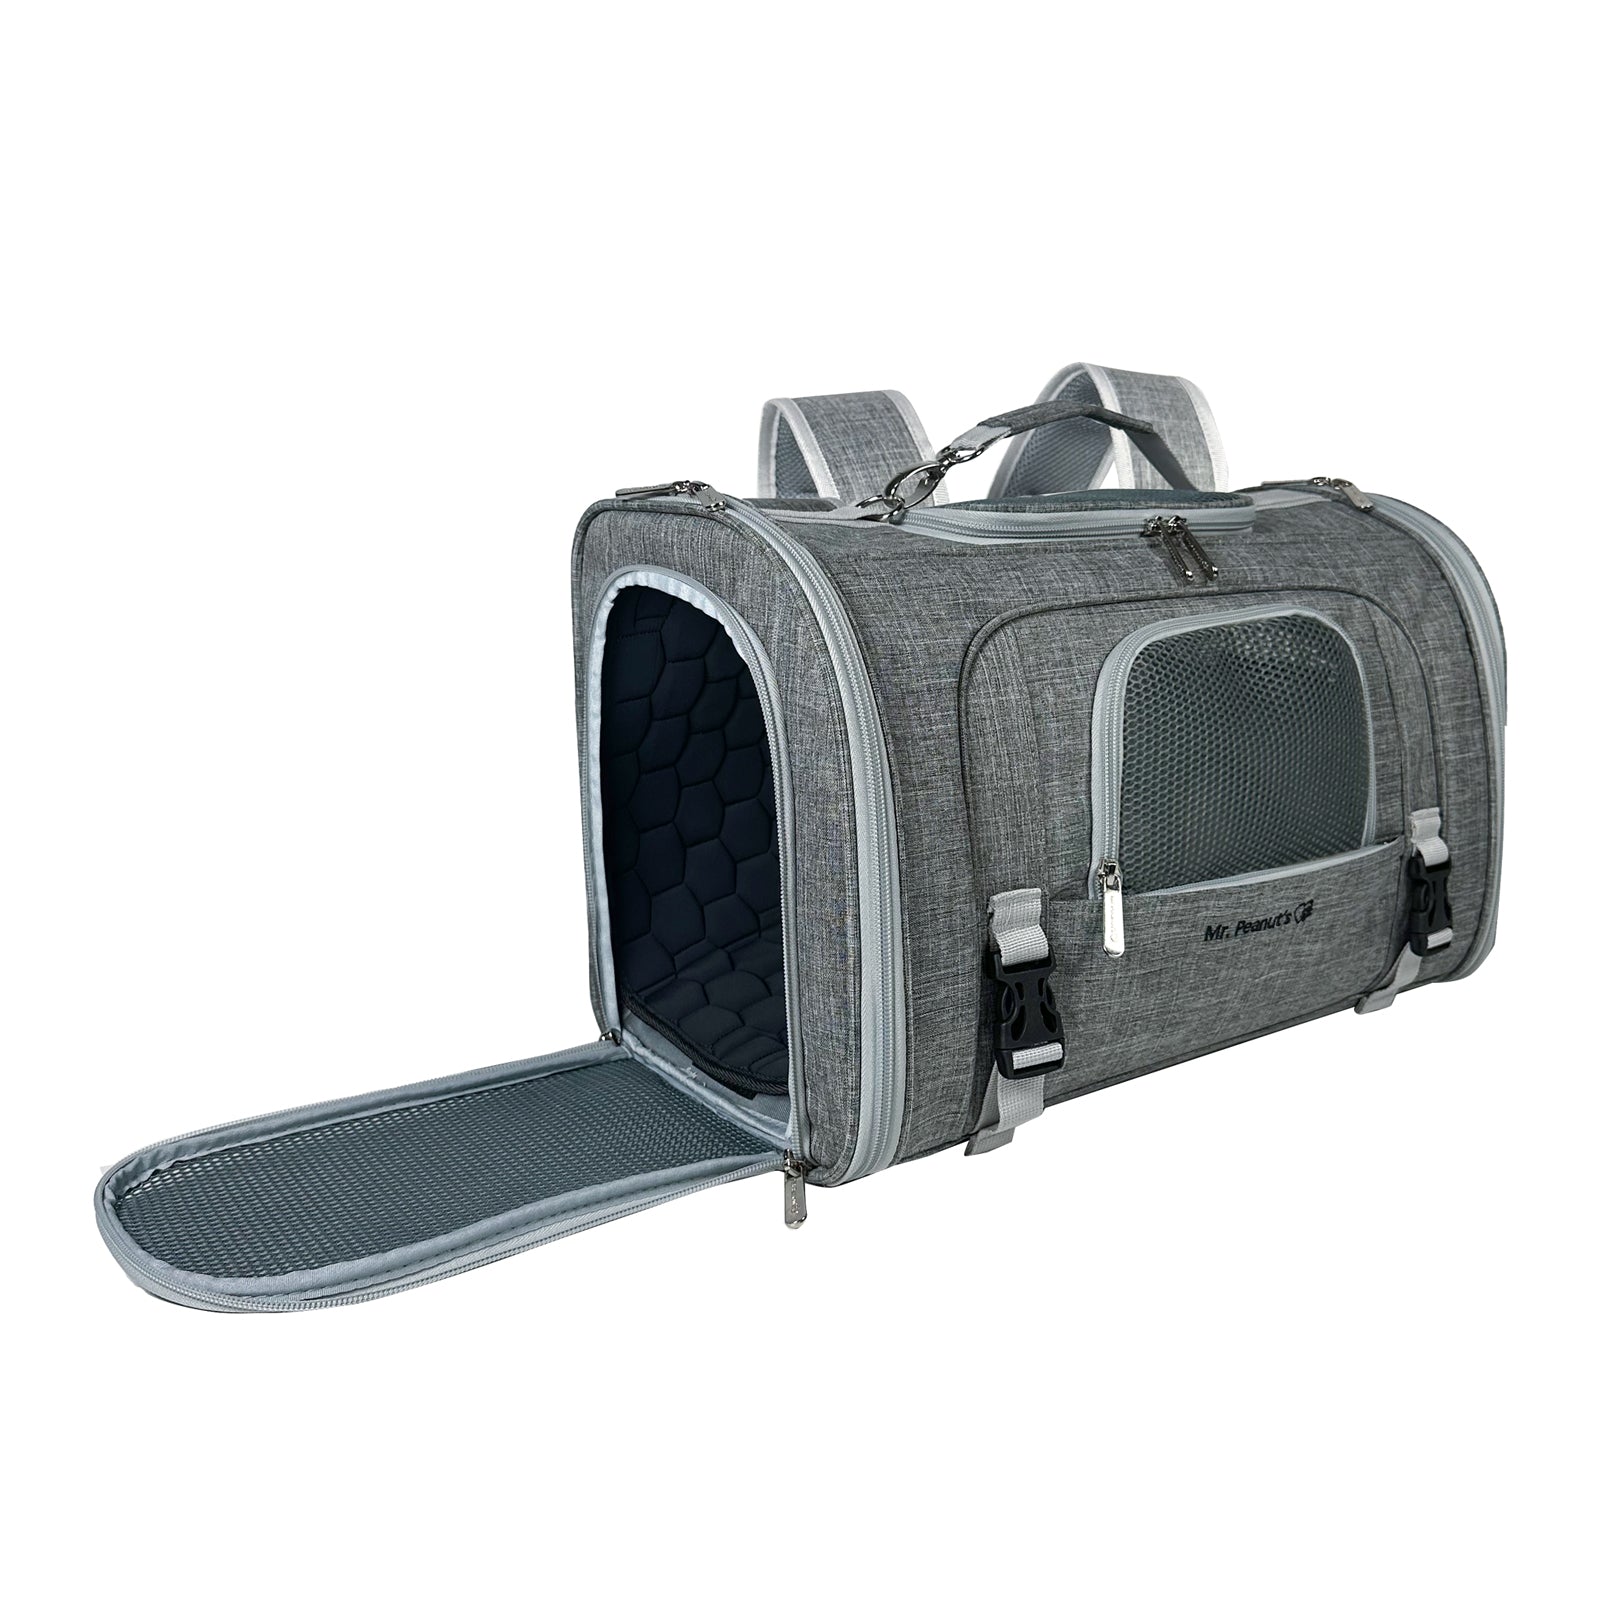 Mr. Peanut's Expandable Tote Is a Versatile Airline-Approved Pet Carrier